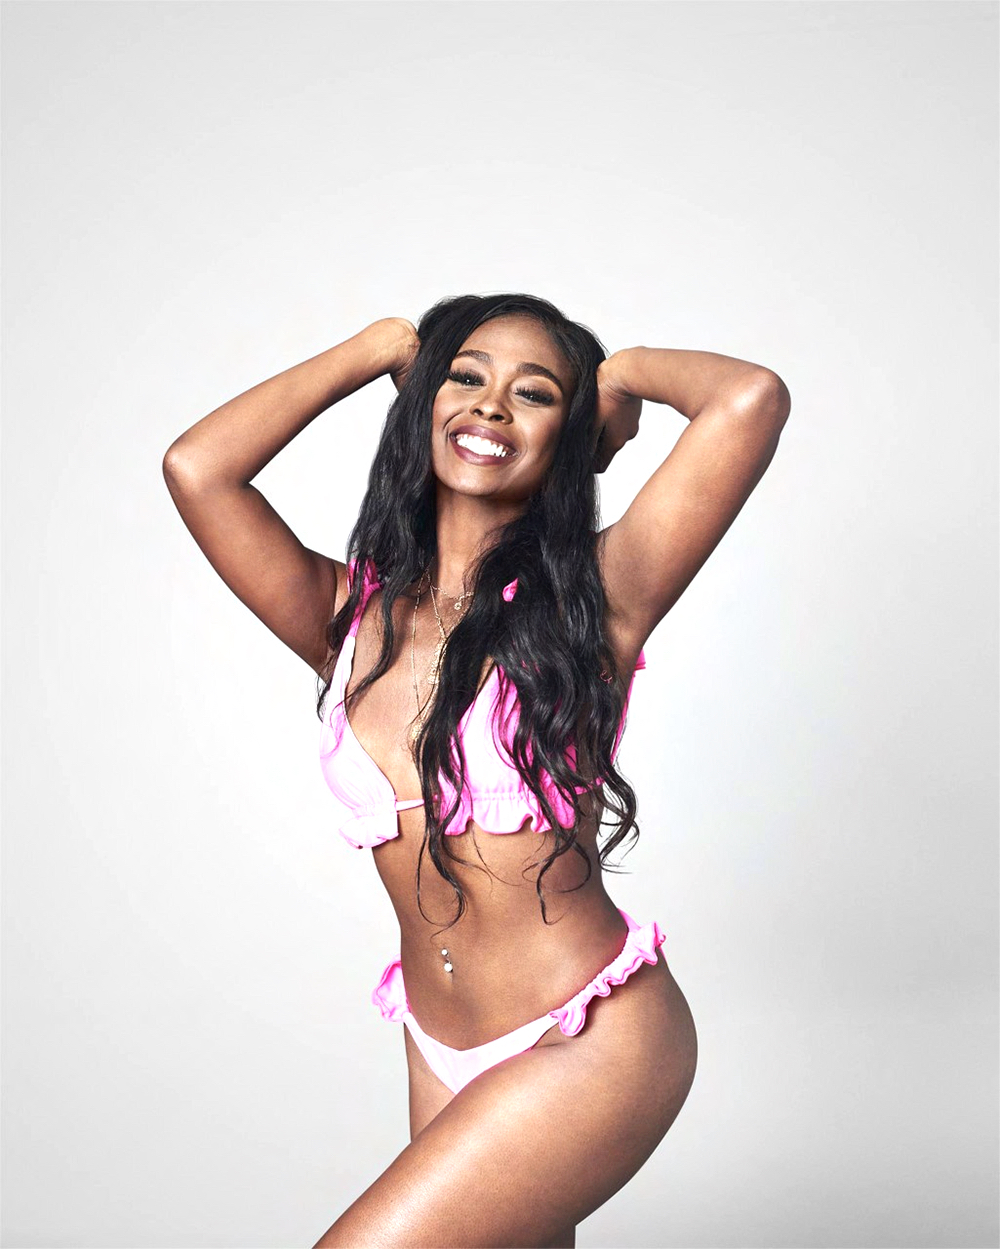 Trina Njoroge was on season 3 of â€˜Love Island,â€™ but she sadly didnâ€™t find her happily ever after. Sheâ€™s ready to take on the competition in â€˜All Star Shore.â€™